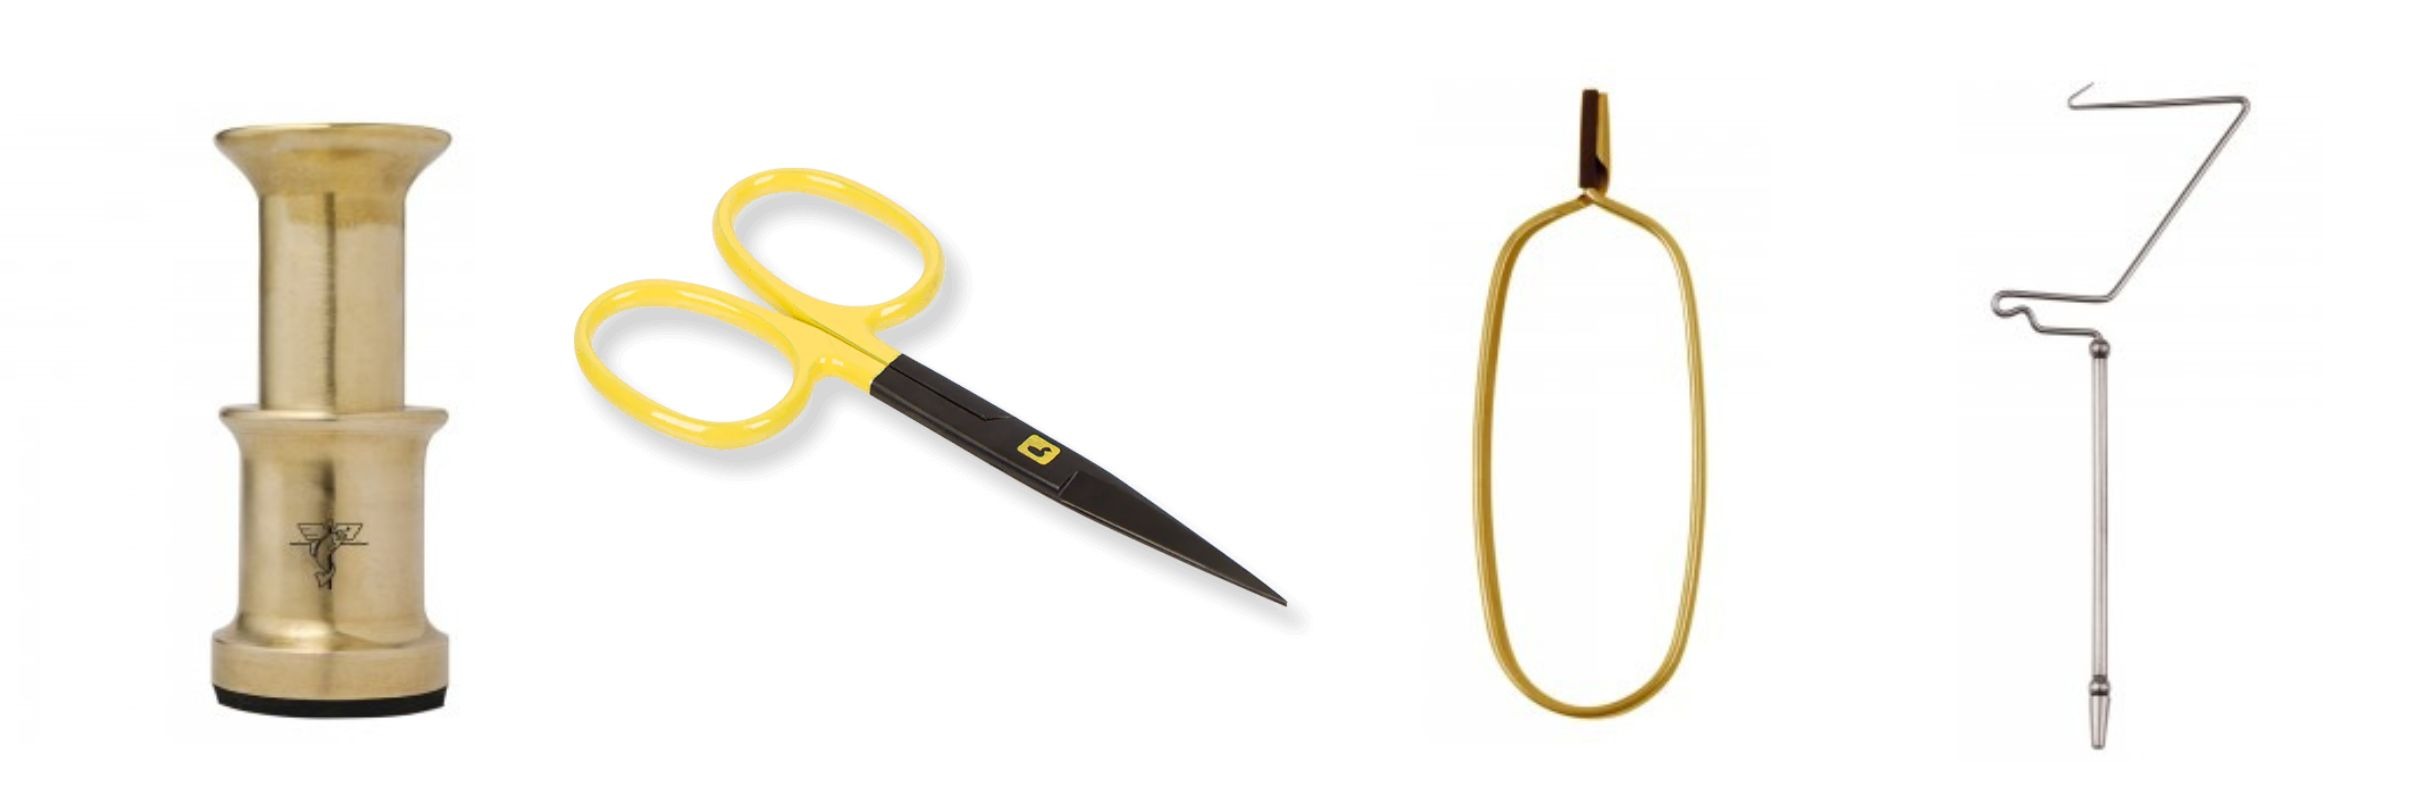 Shop Fly Tying Tools: Scissors, Bobbins, and More